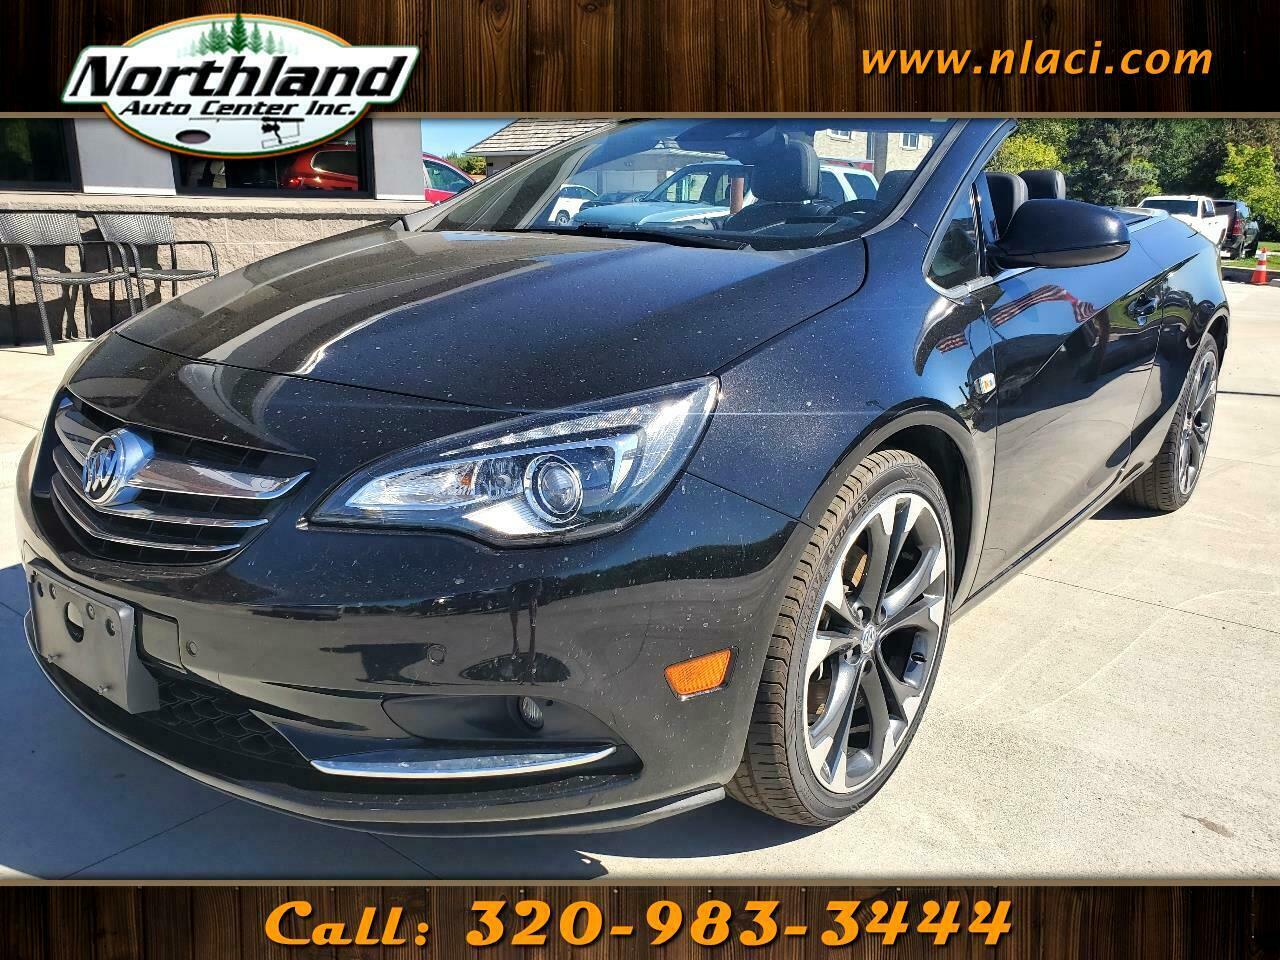 2018 Buick Cascada 2dr Conv Premium 2018 Buick Cascada, Charcoal With 43340 Miles Available Now!